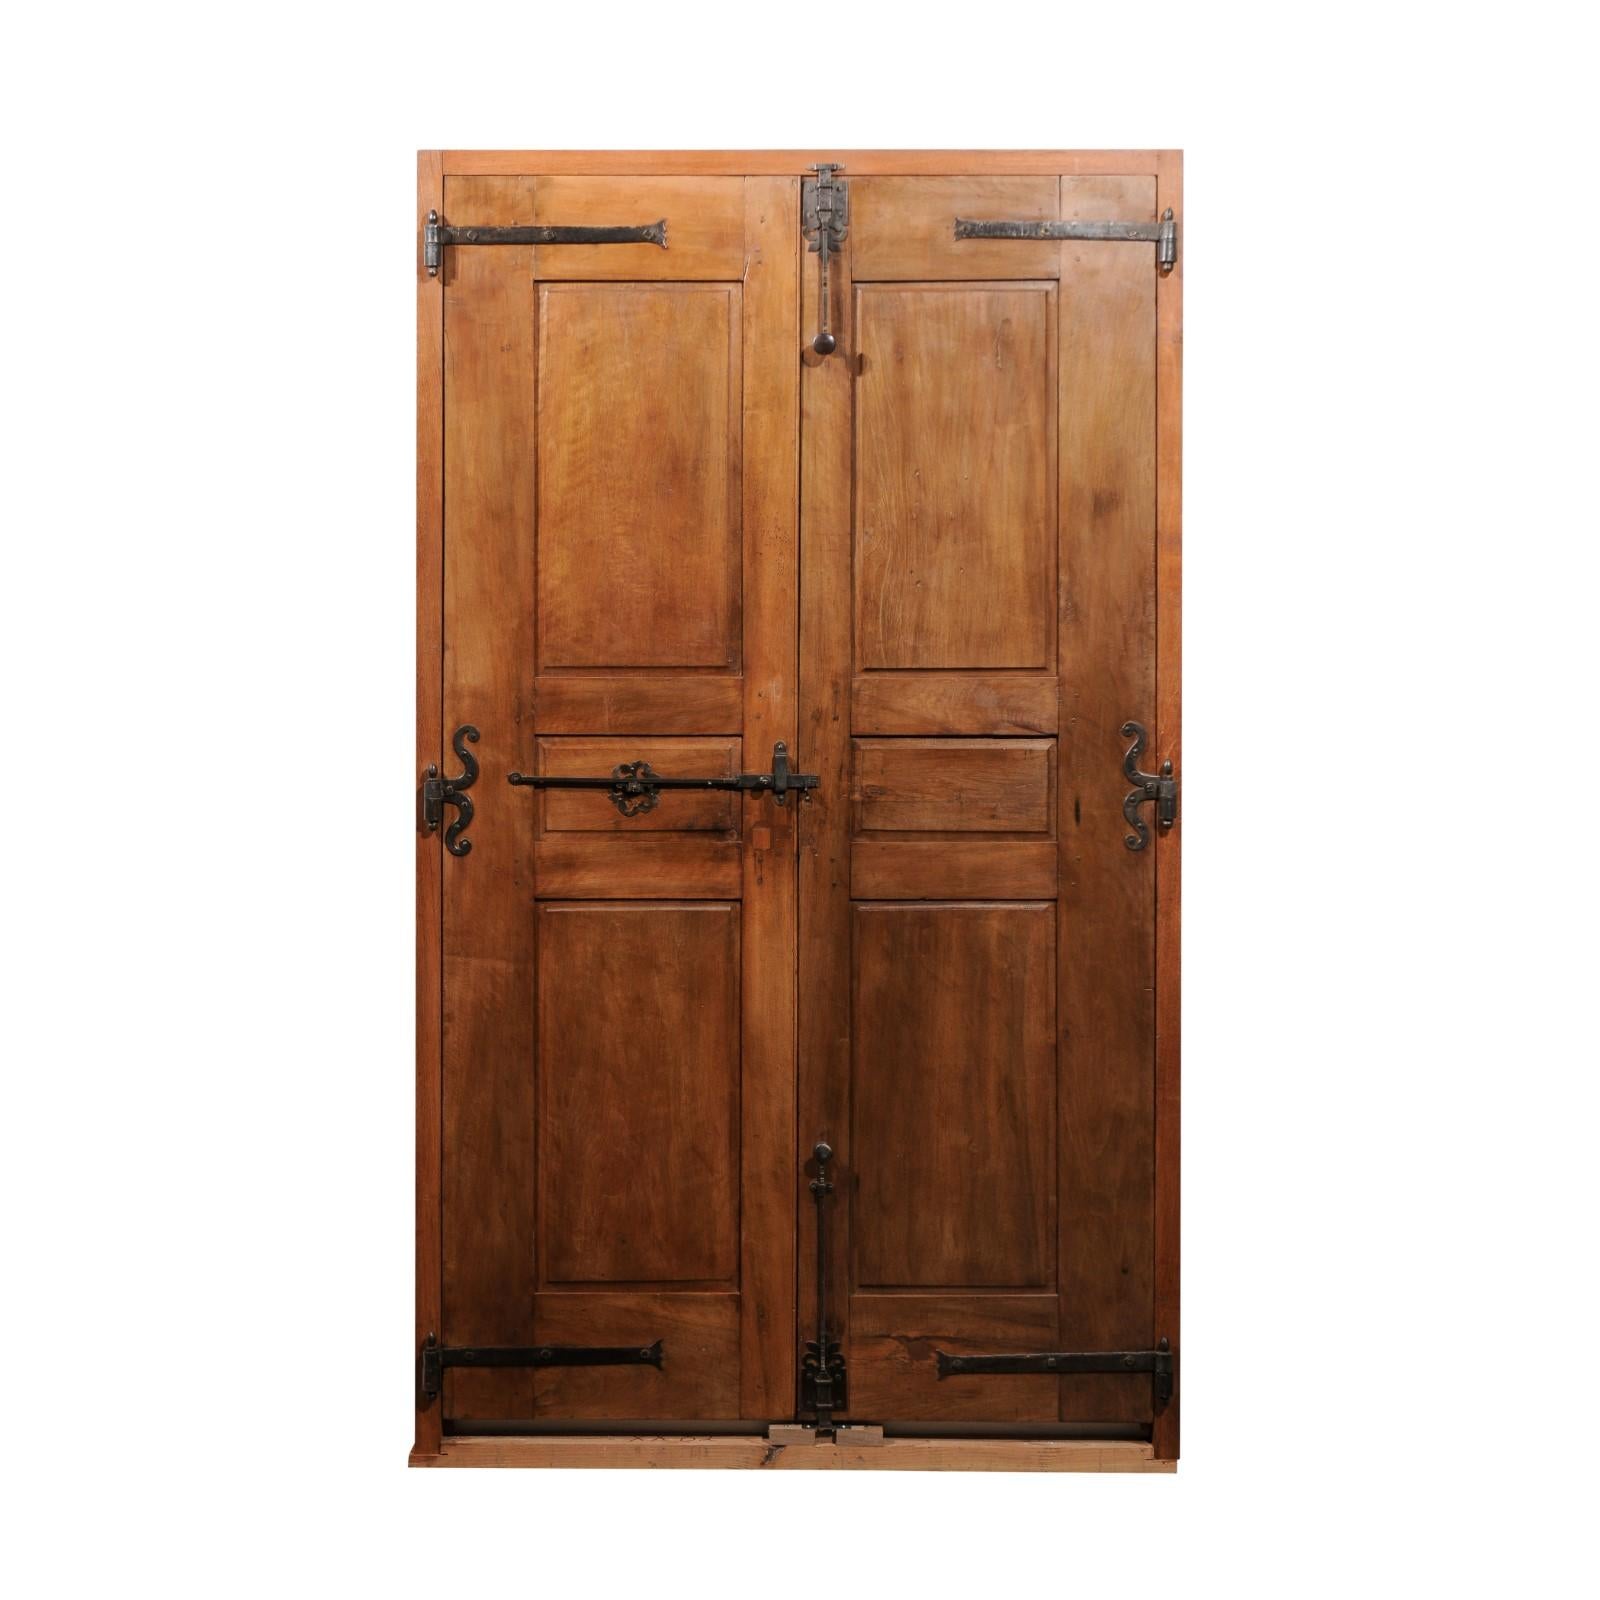 A pair of French Louis XV period walnut communication doors from the mid 18th century, with raised panels and iron hardware. Created in France in the 18th century during the reign of King Louis XV nicknamed Le Bien-Aimé (the Beloved), this walnut